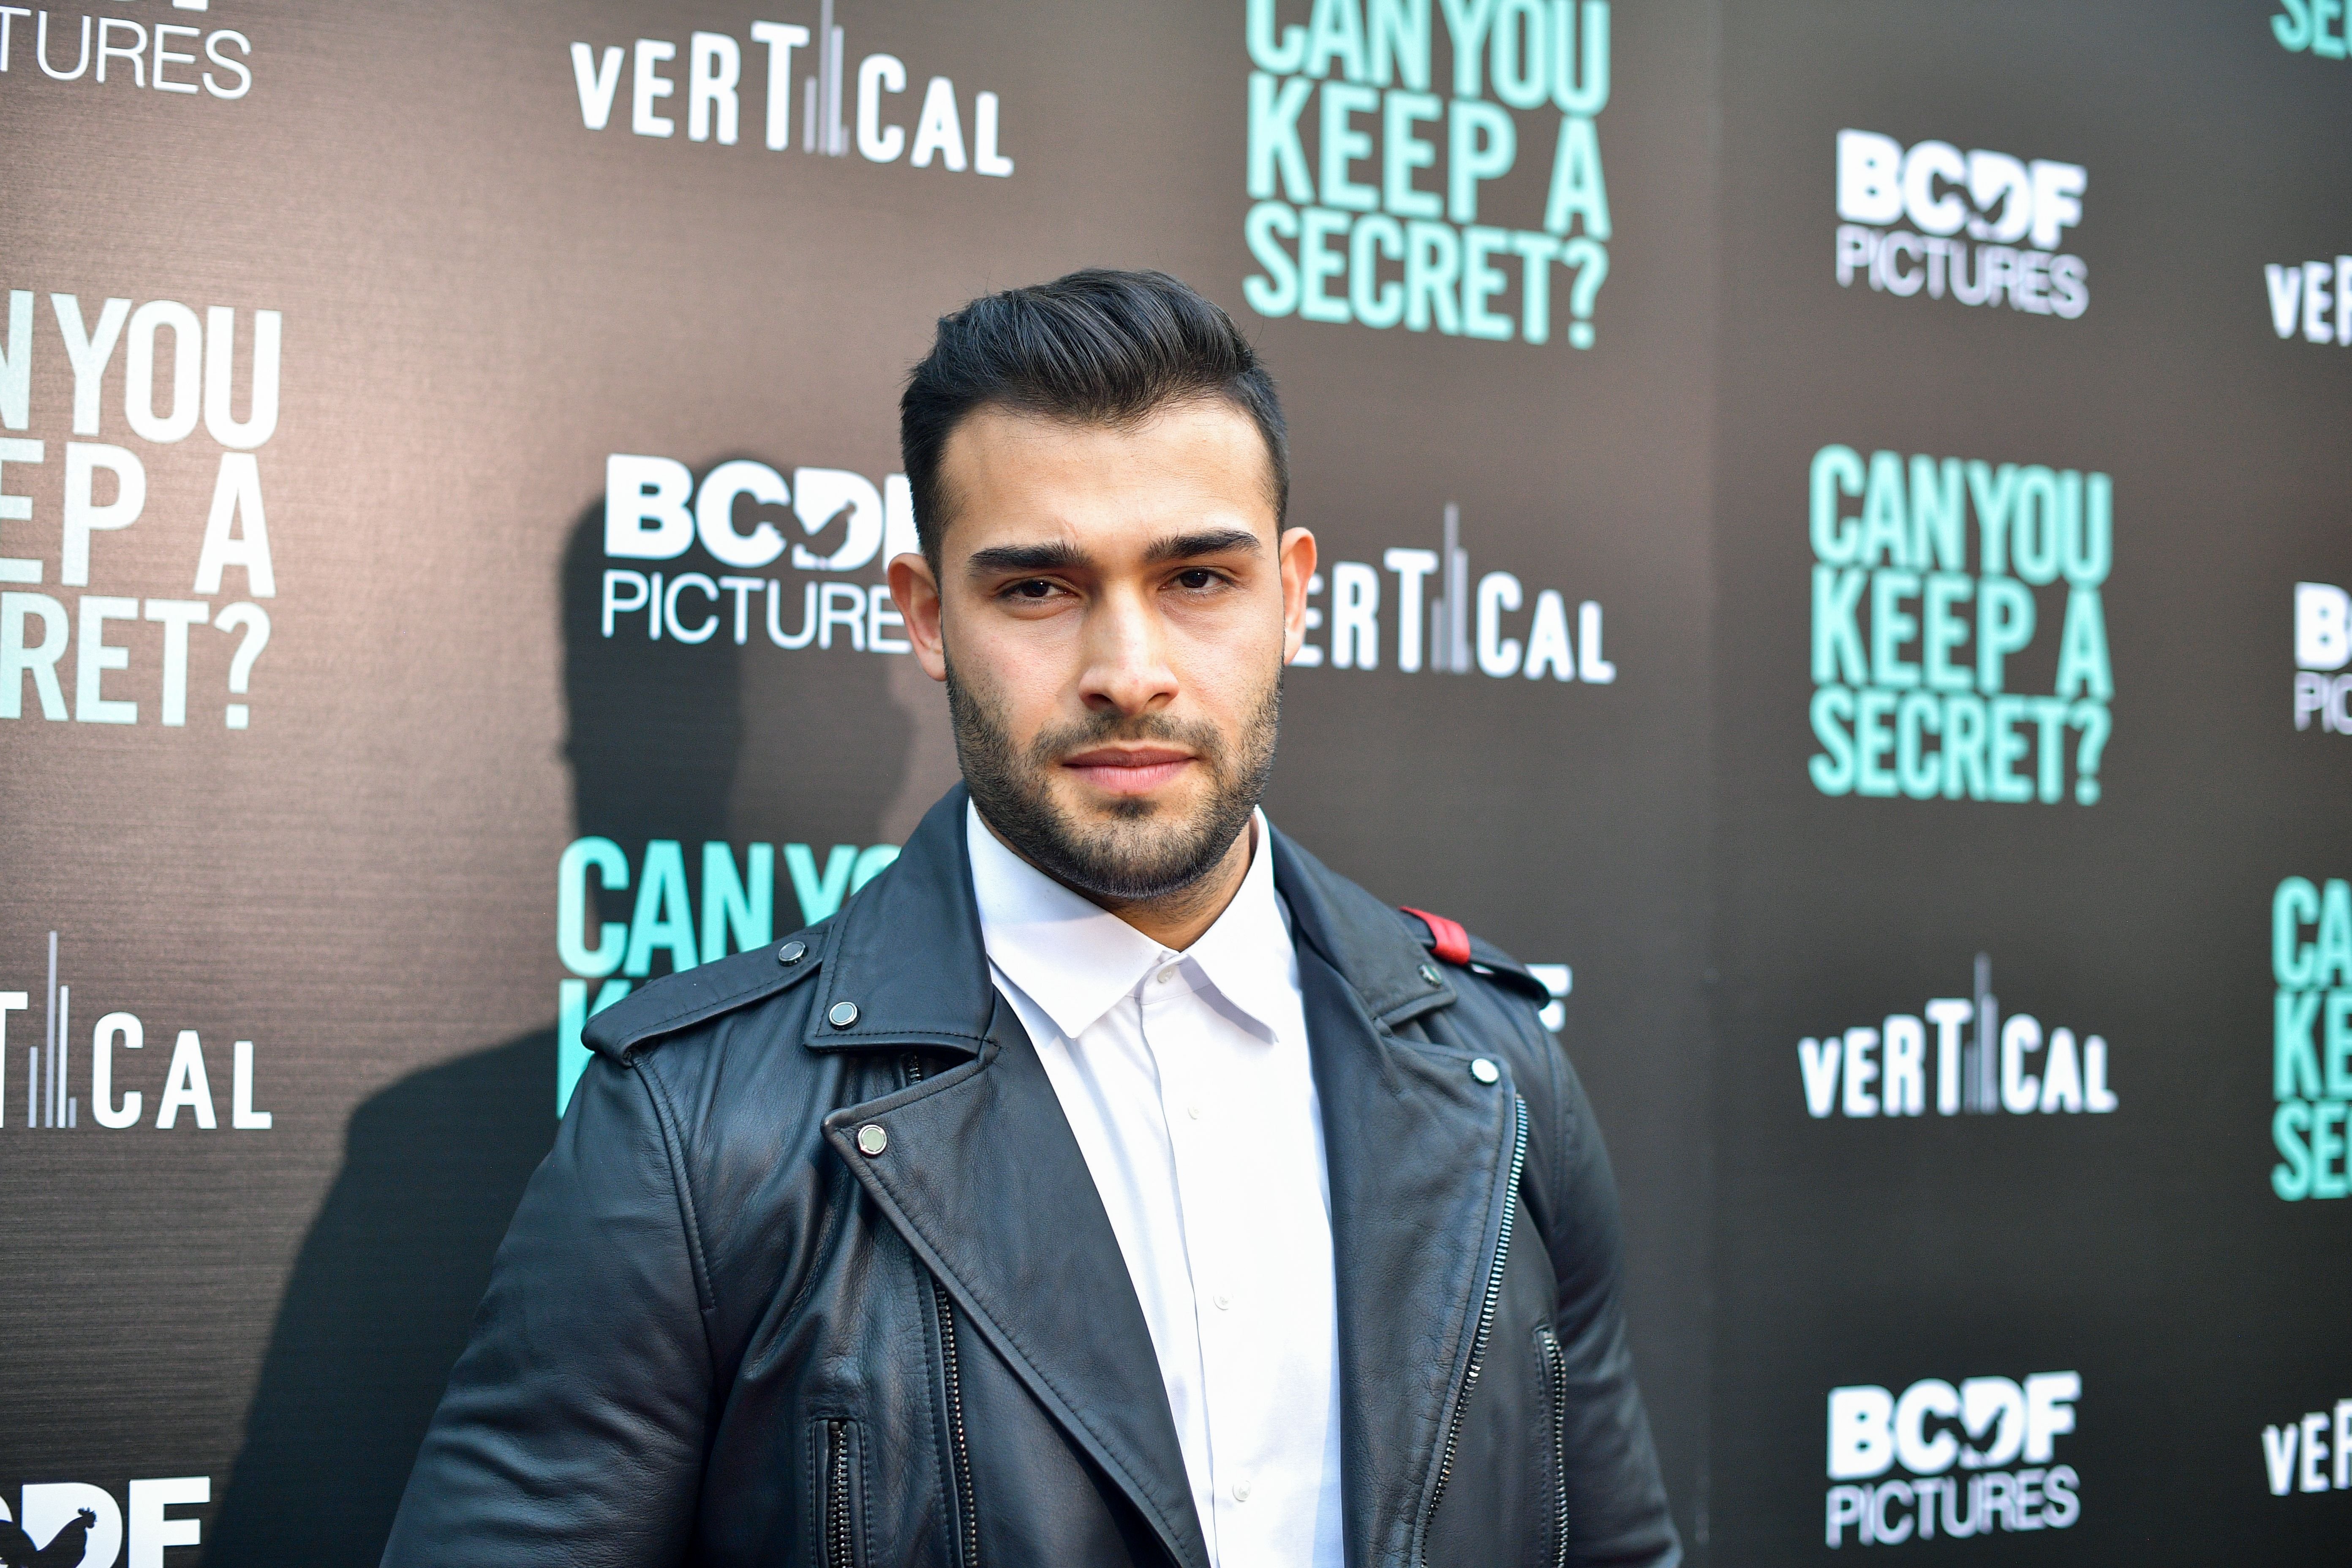 Sam Asghari at the premiere of "Can You Keep A Secret?" at ArcLight Hollywood in California | Photo:  Matt Winkelmeyer/Getty Images